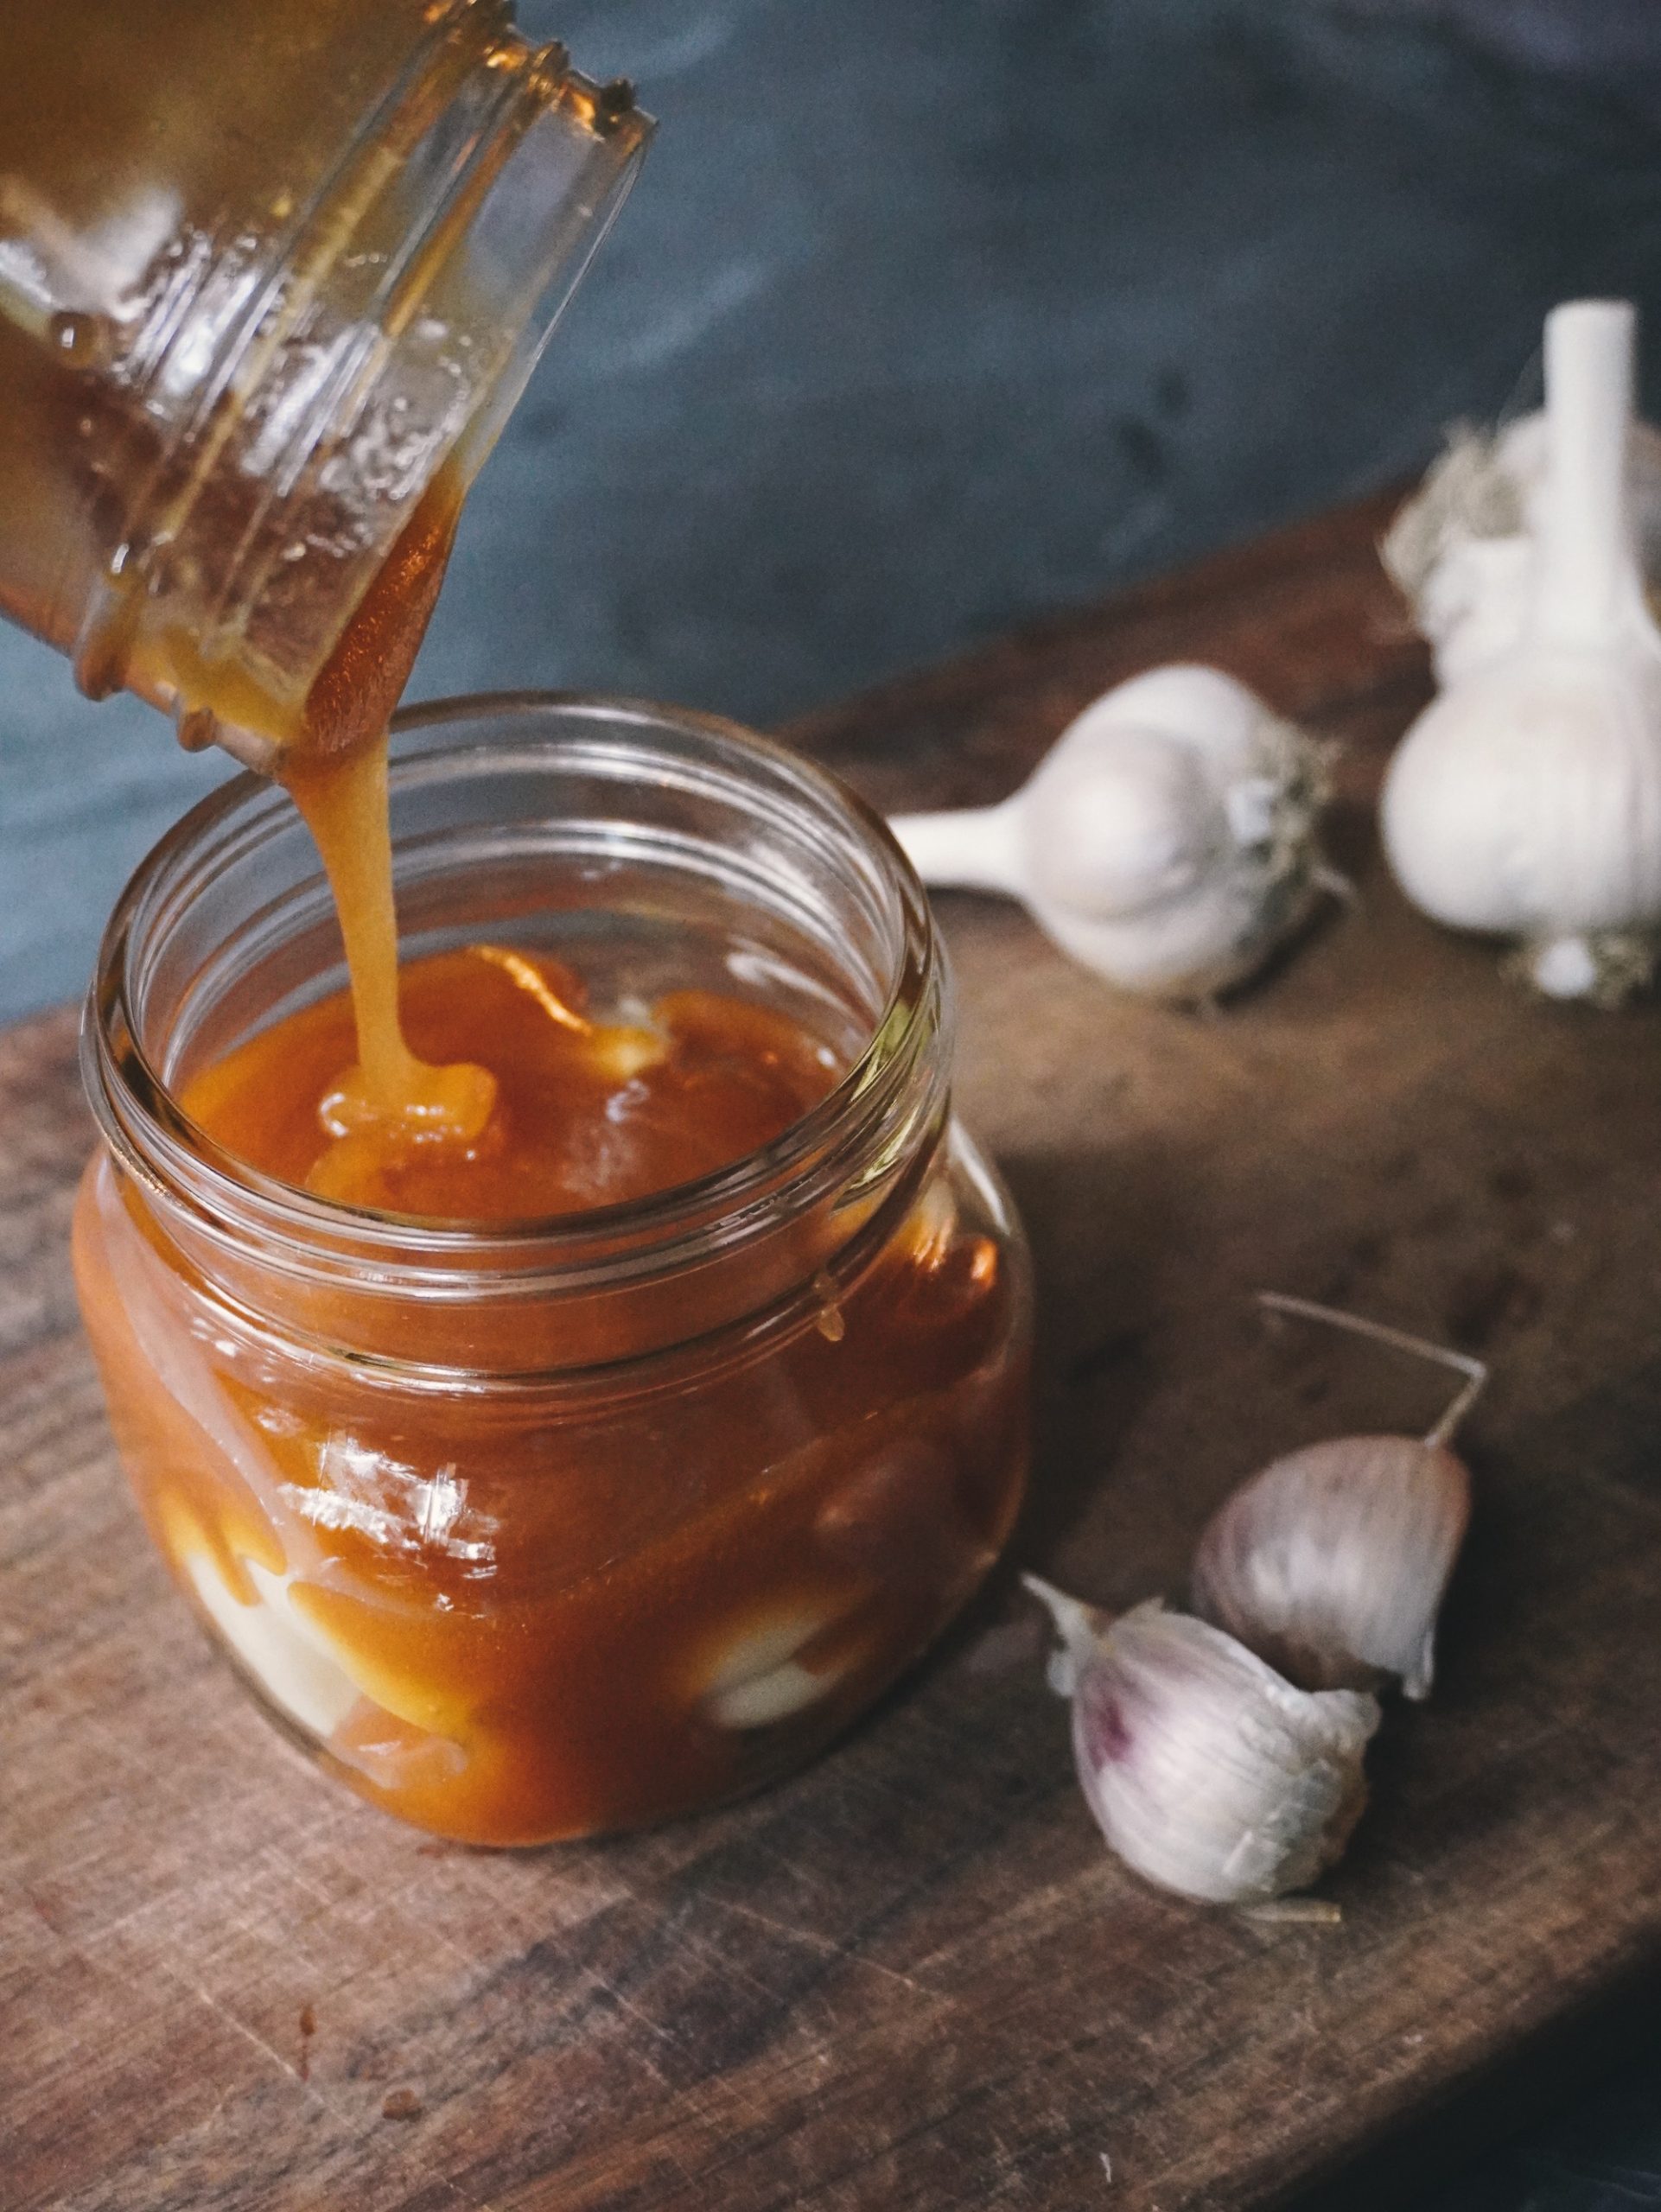 A photo of a jar full of raw garlic with raw honey being poured over it. The jar is sitting on a wooden cutting board on a slate countertop.